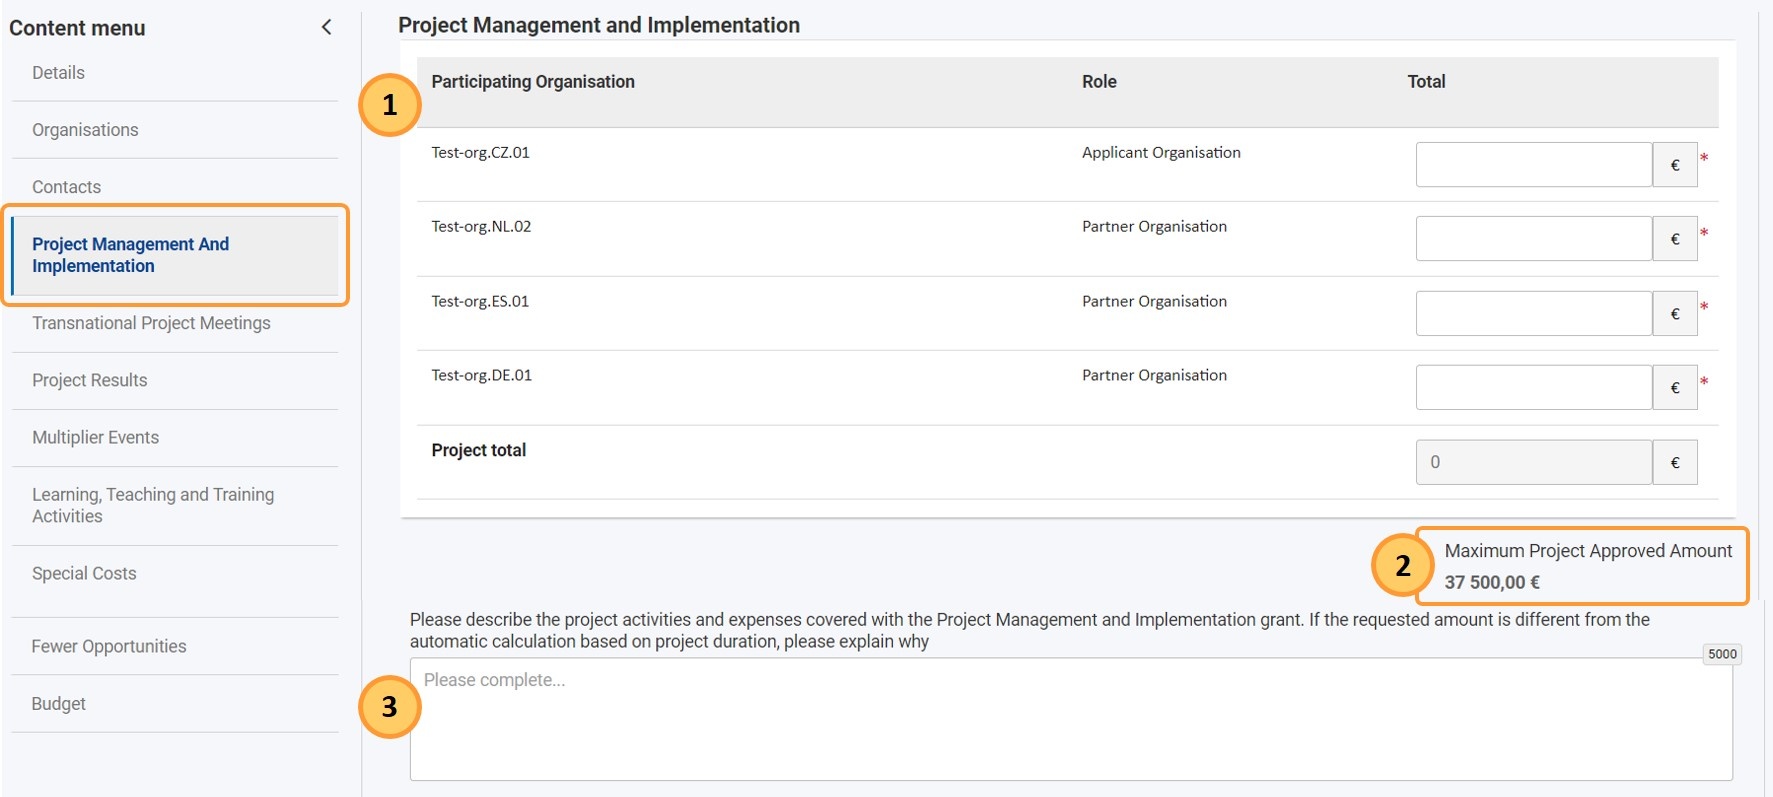 Project Management and Implementation screen